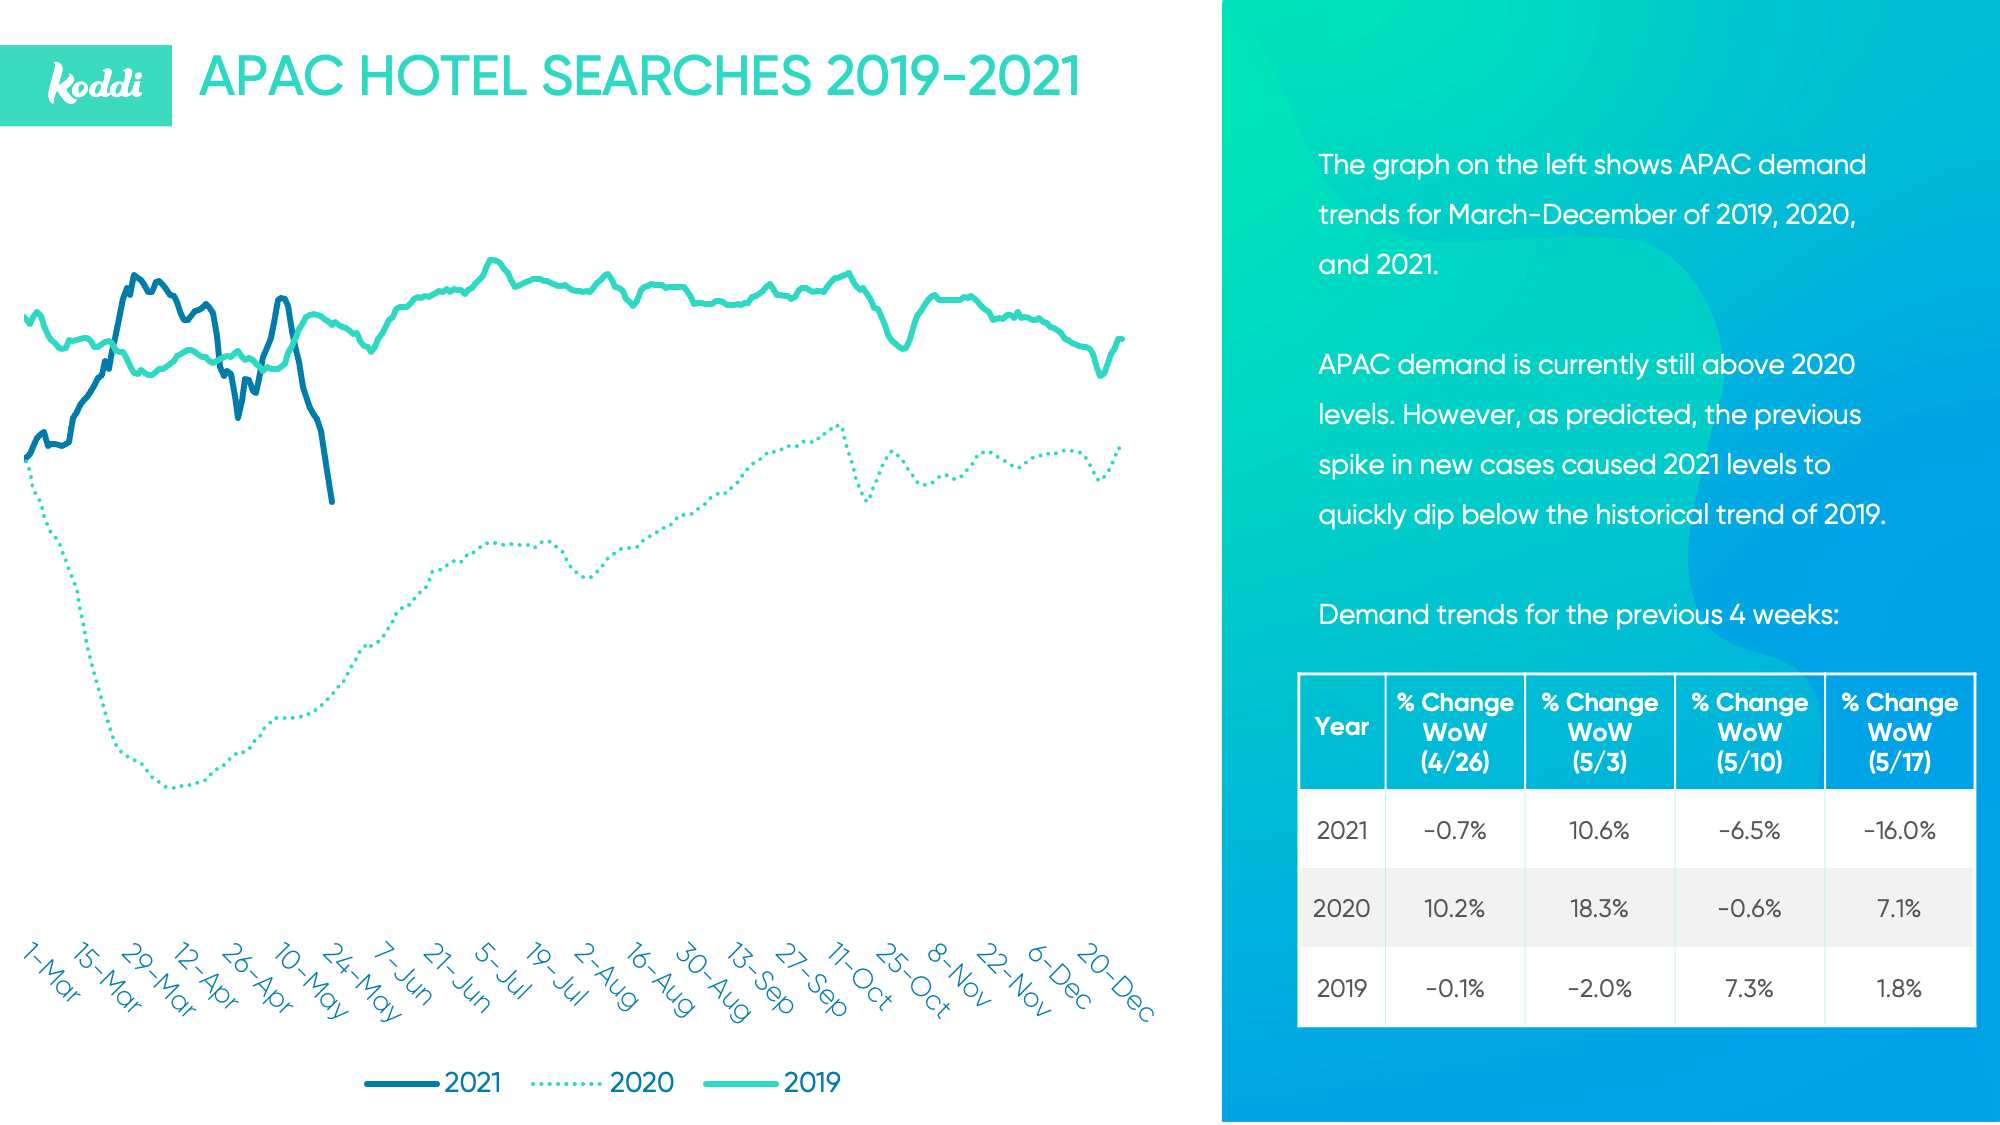 apac hotel searches 2019-2021